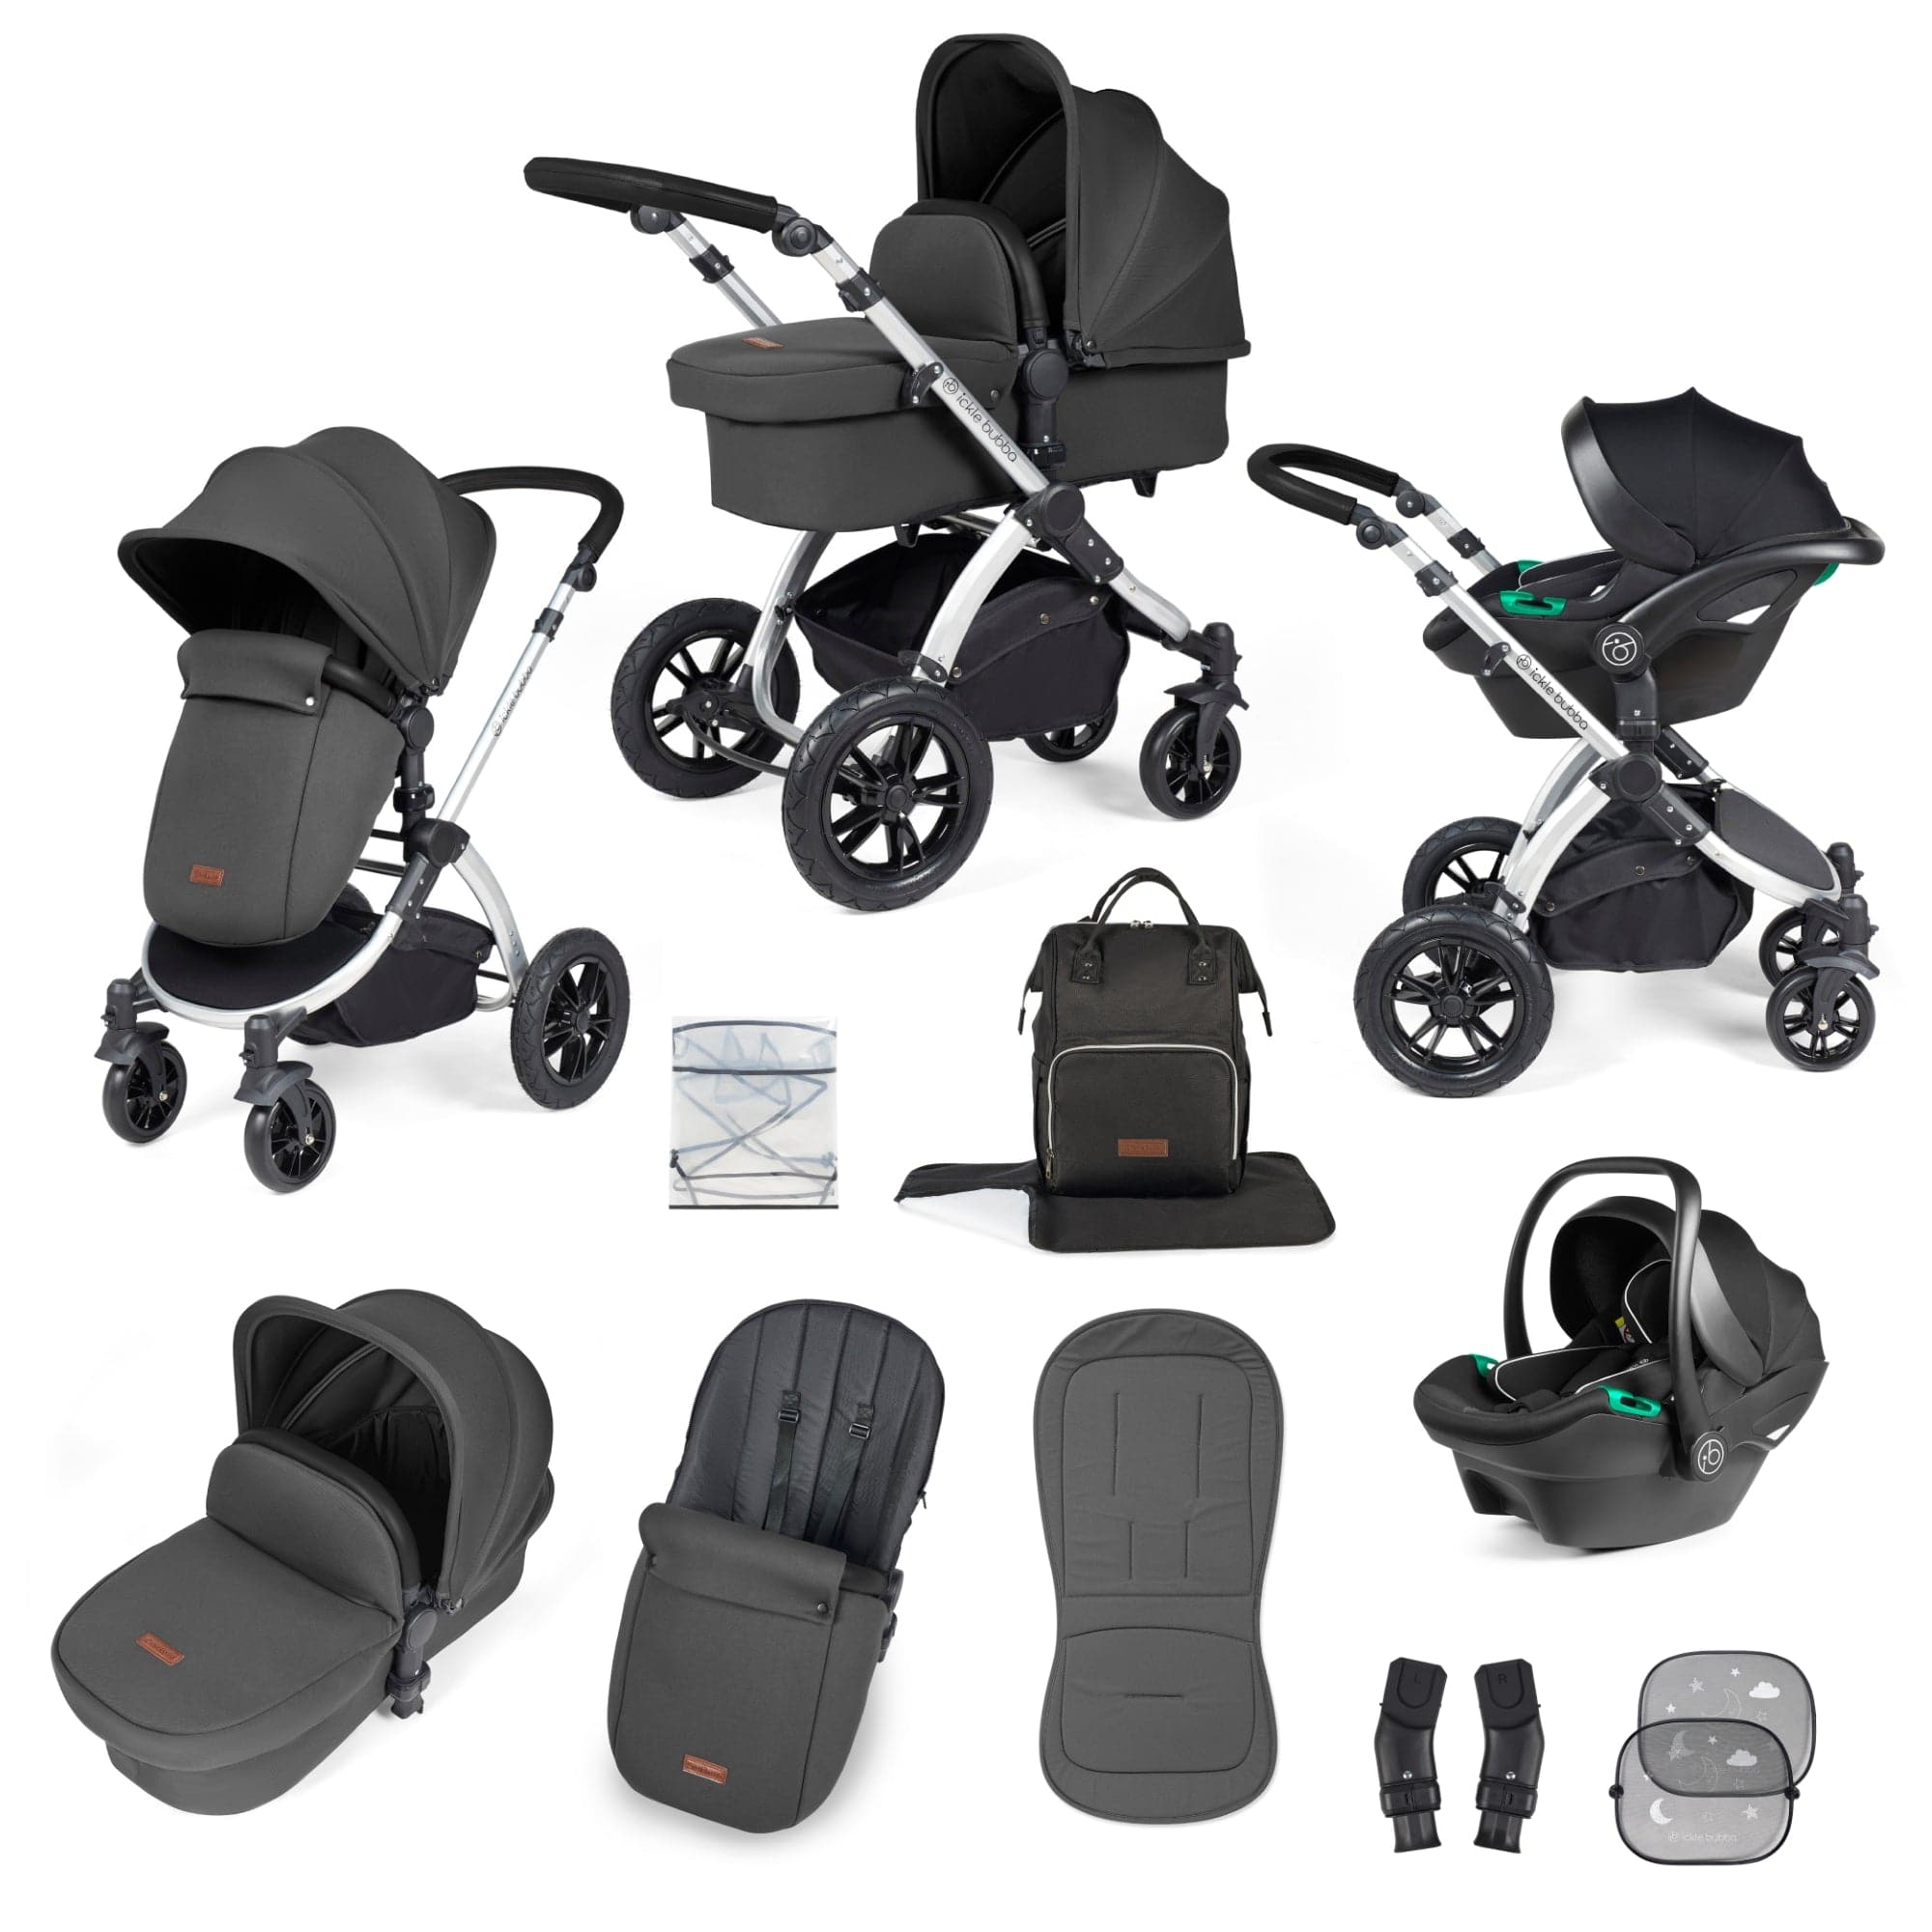 Ickle Bubba Stomp Luxe All-In-One I-Size Travel System With Isofix Base - Silver / Charcoal Grey / Black - For Your Little One